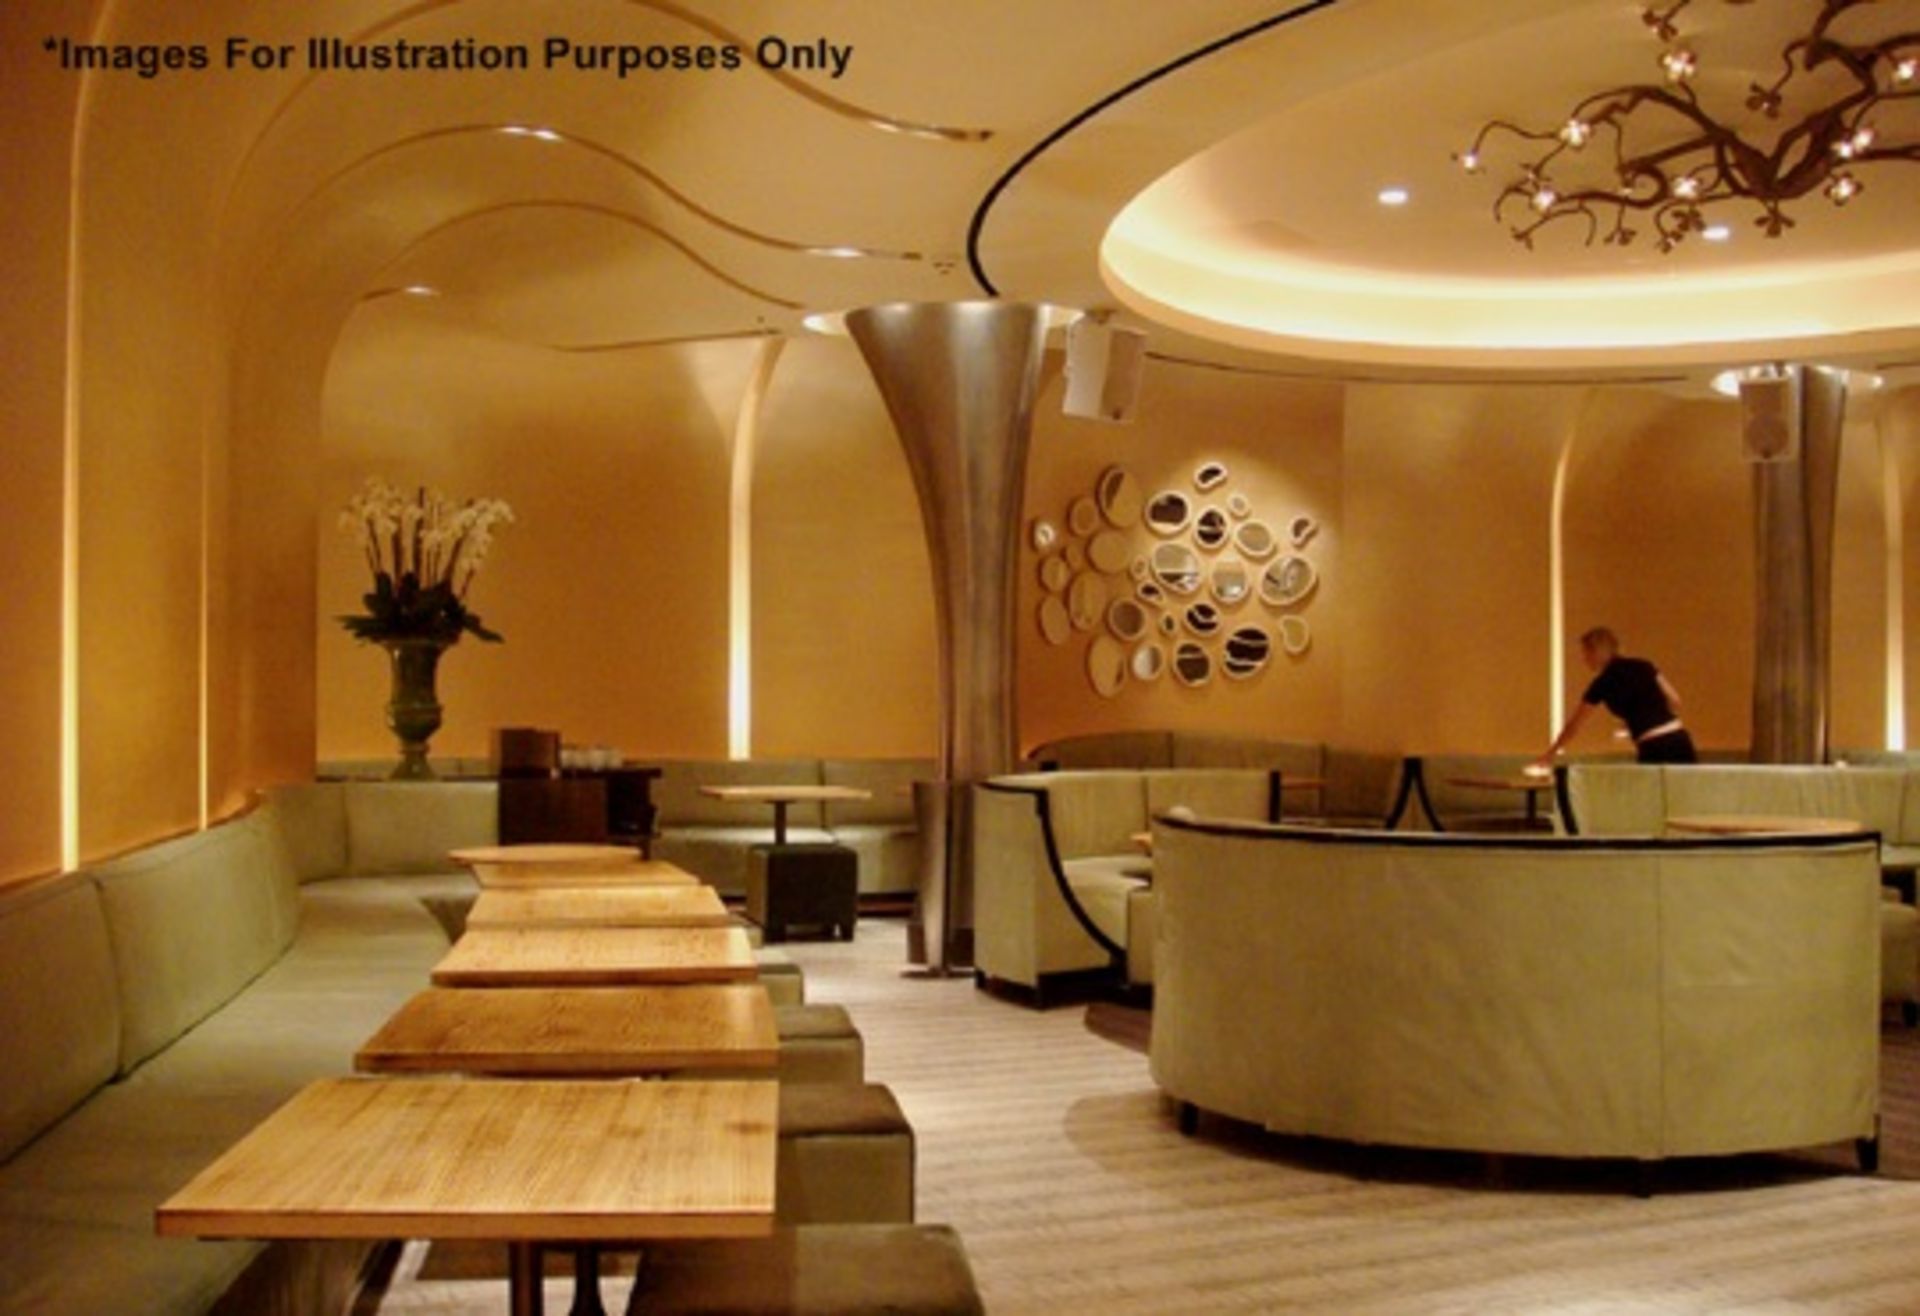 1 x Luxury Upholstered Curved Seating Area - Recently Removed From Nobu - Dimensions: W285 x D62cm x - Image 15 of 18